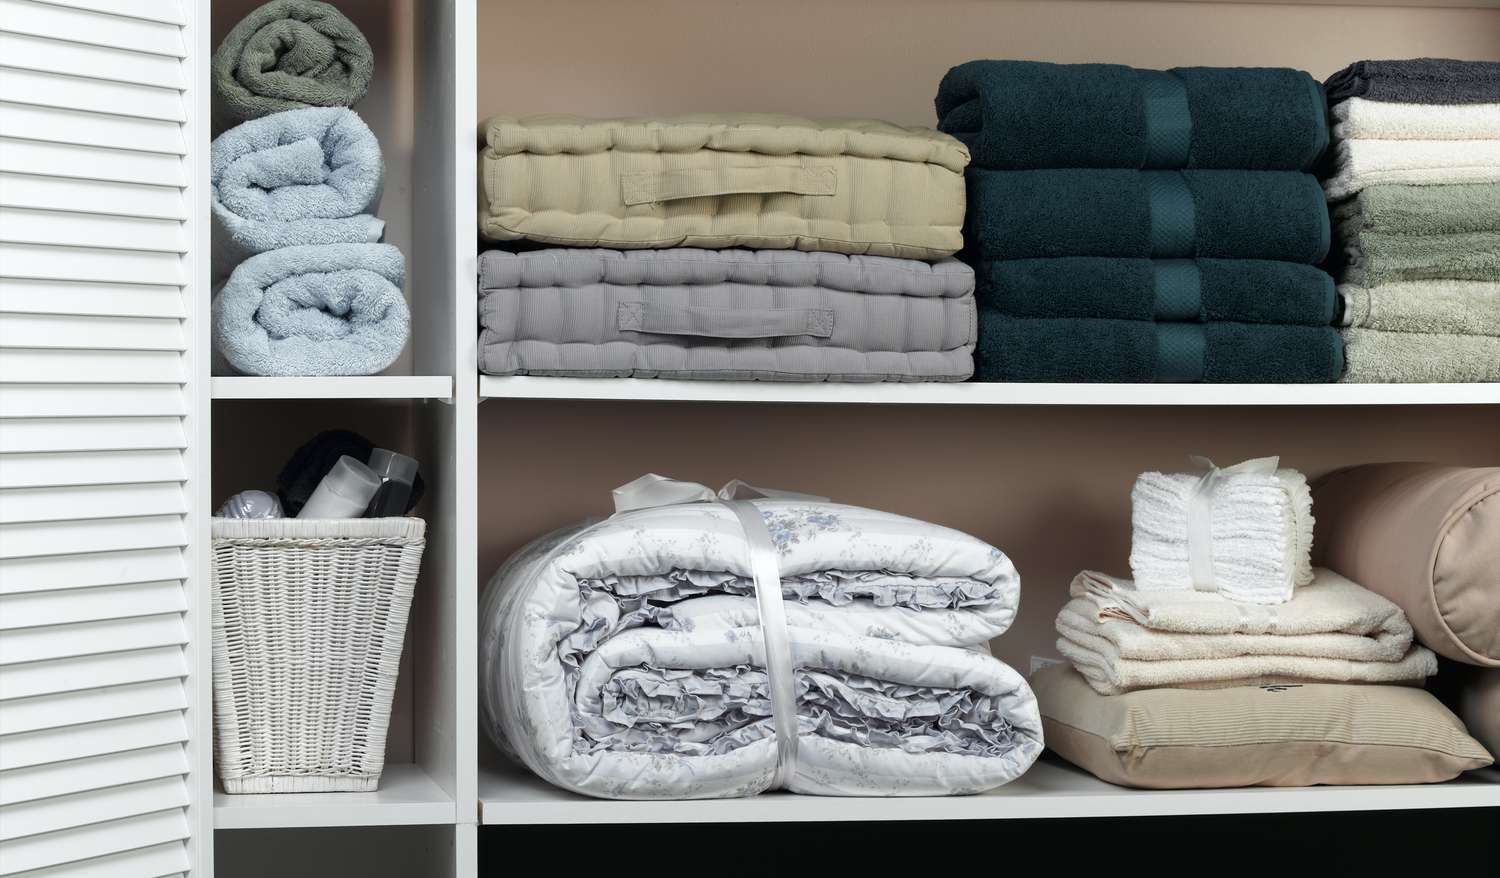 towels and linens in closet